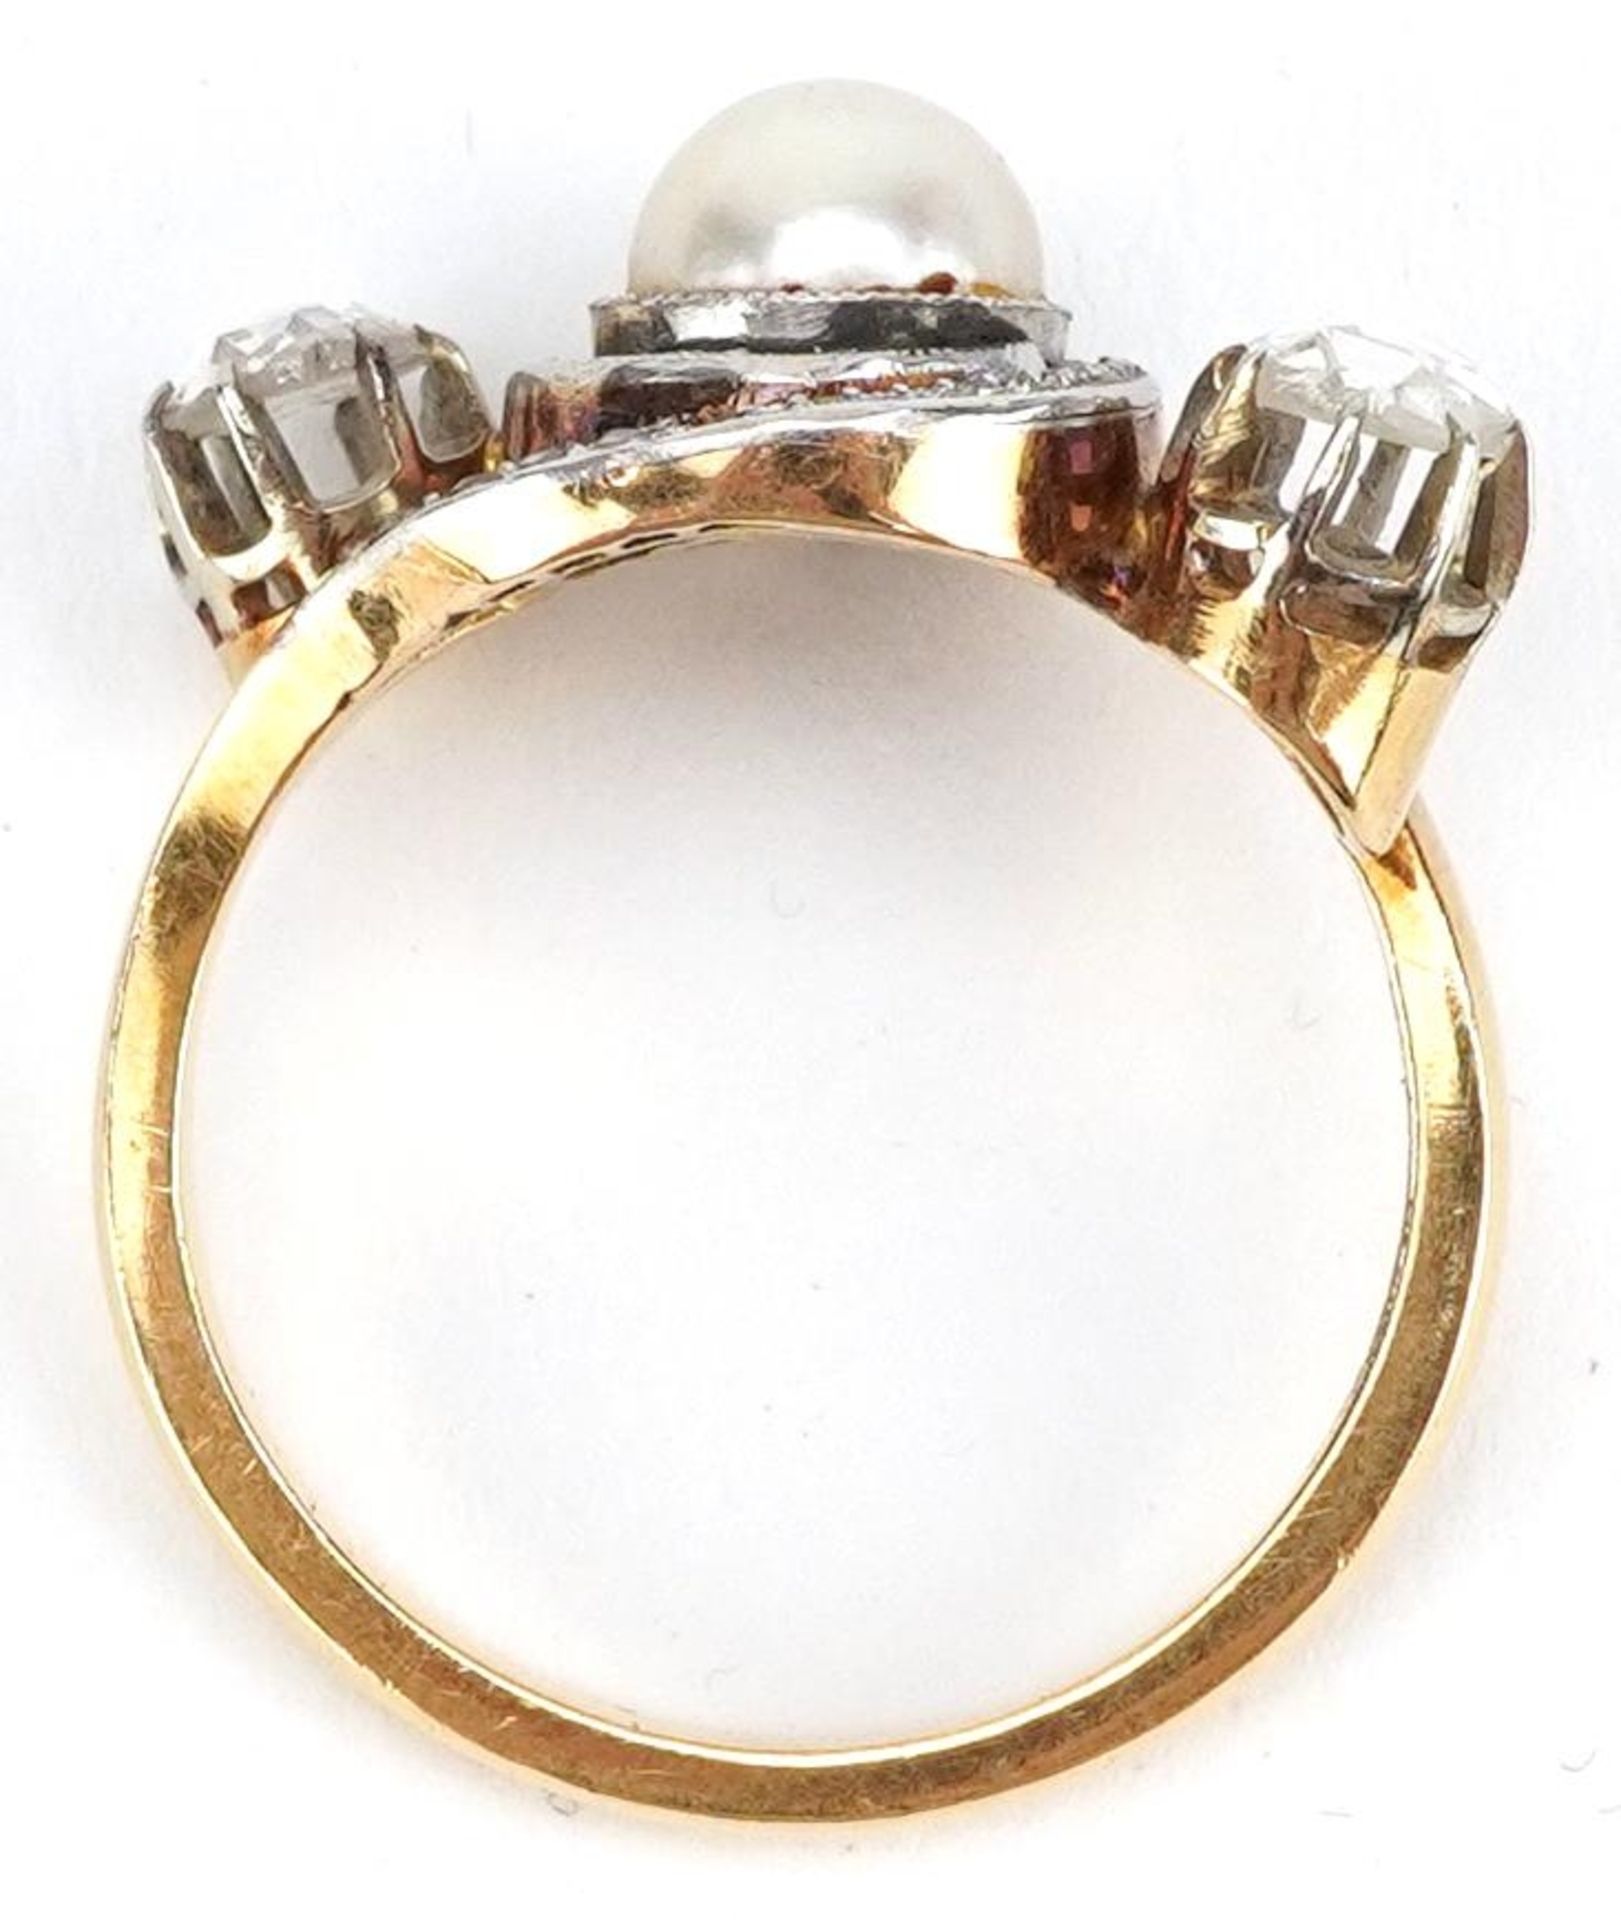 Unmarked gold cultured pearl and diamond three stone ring with diamond crossover shoulders, tests as - Image 3 of 3